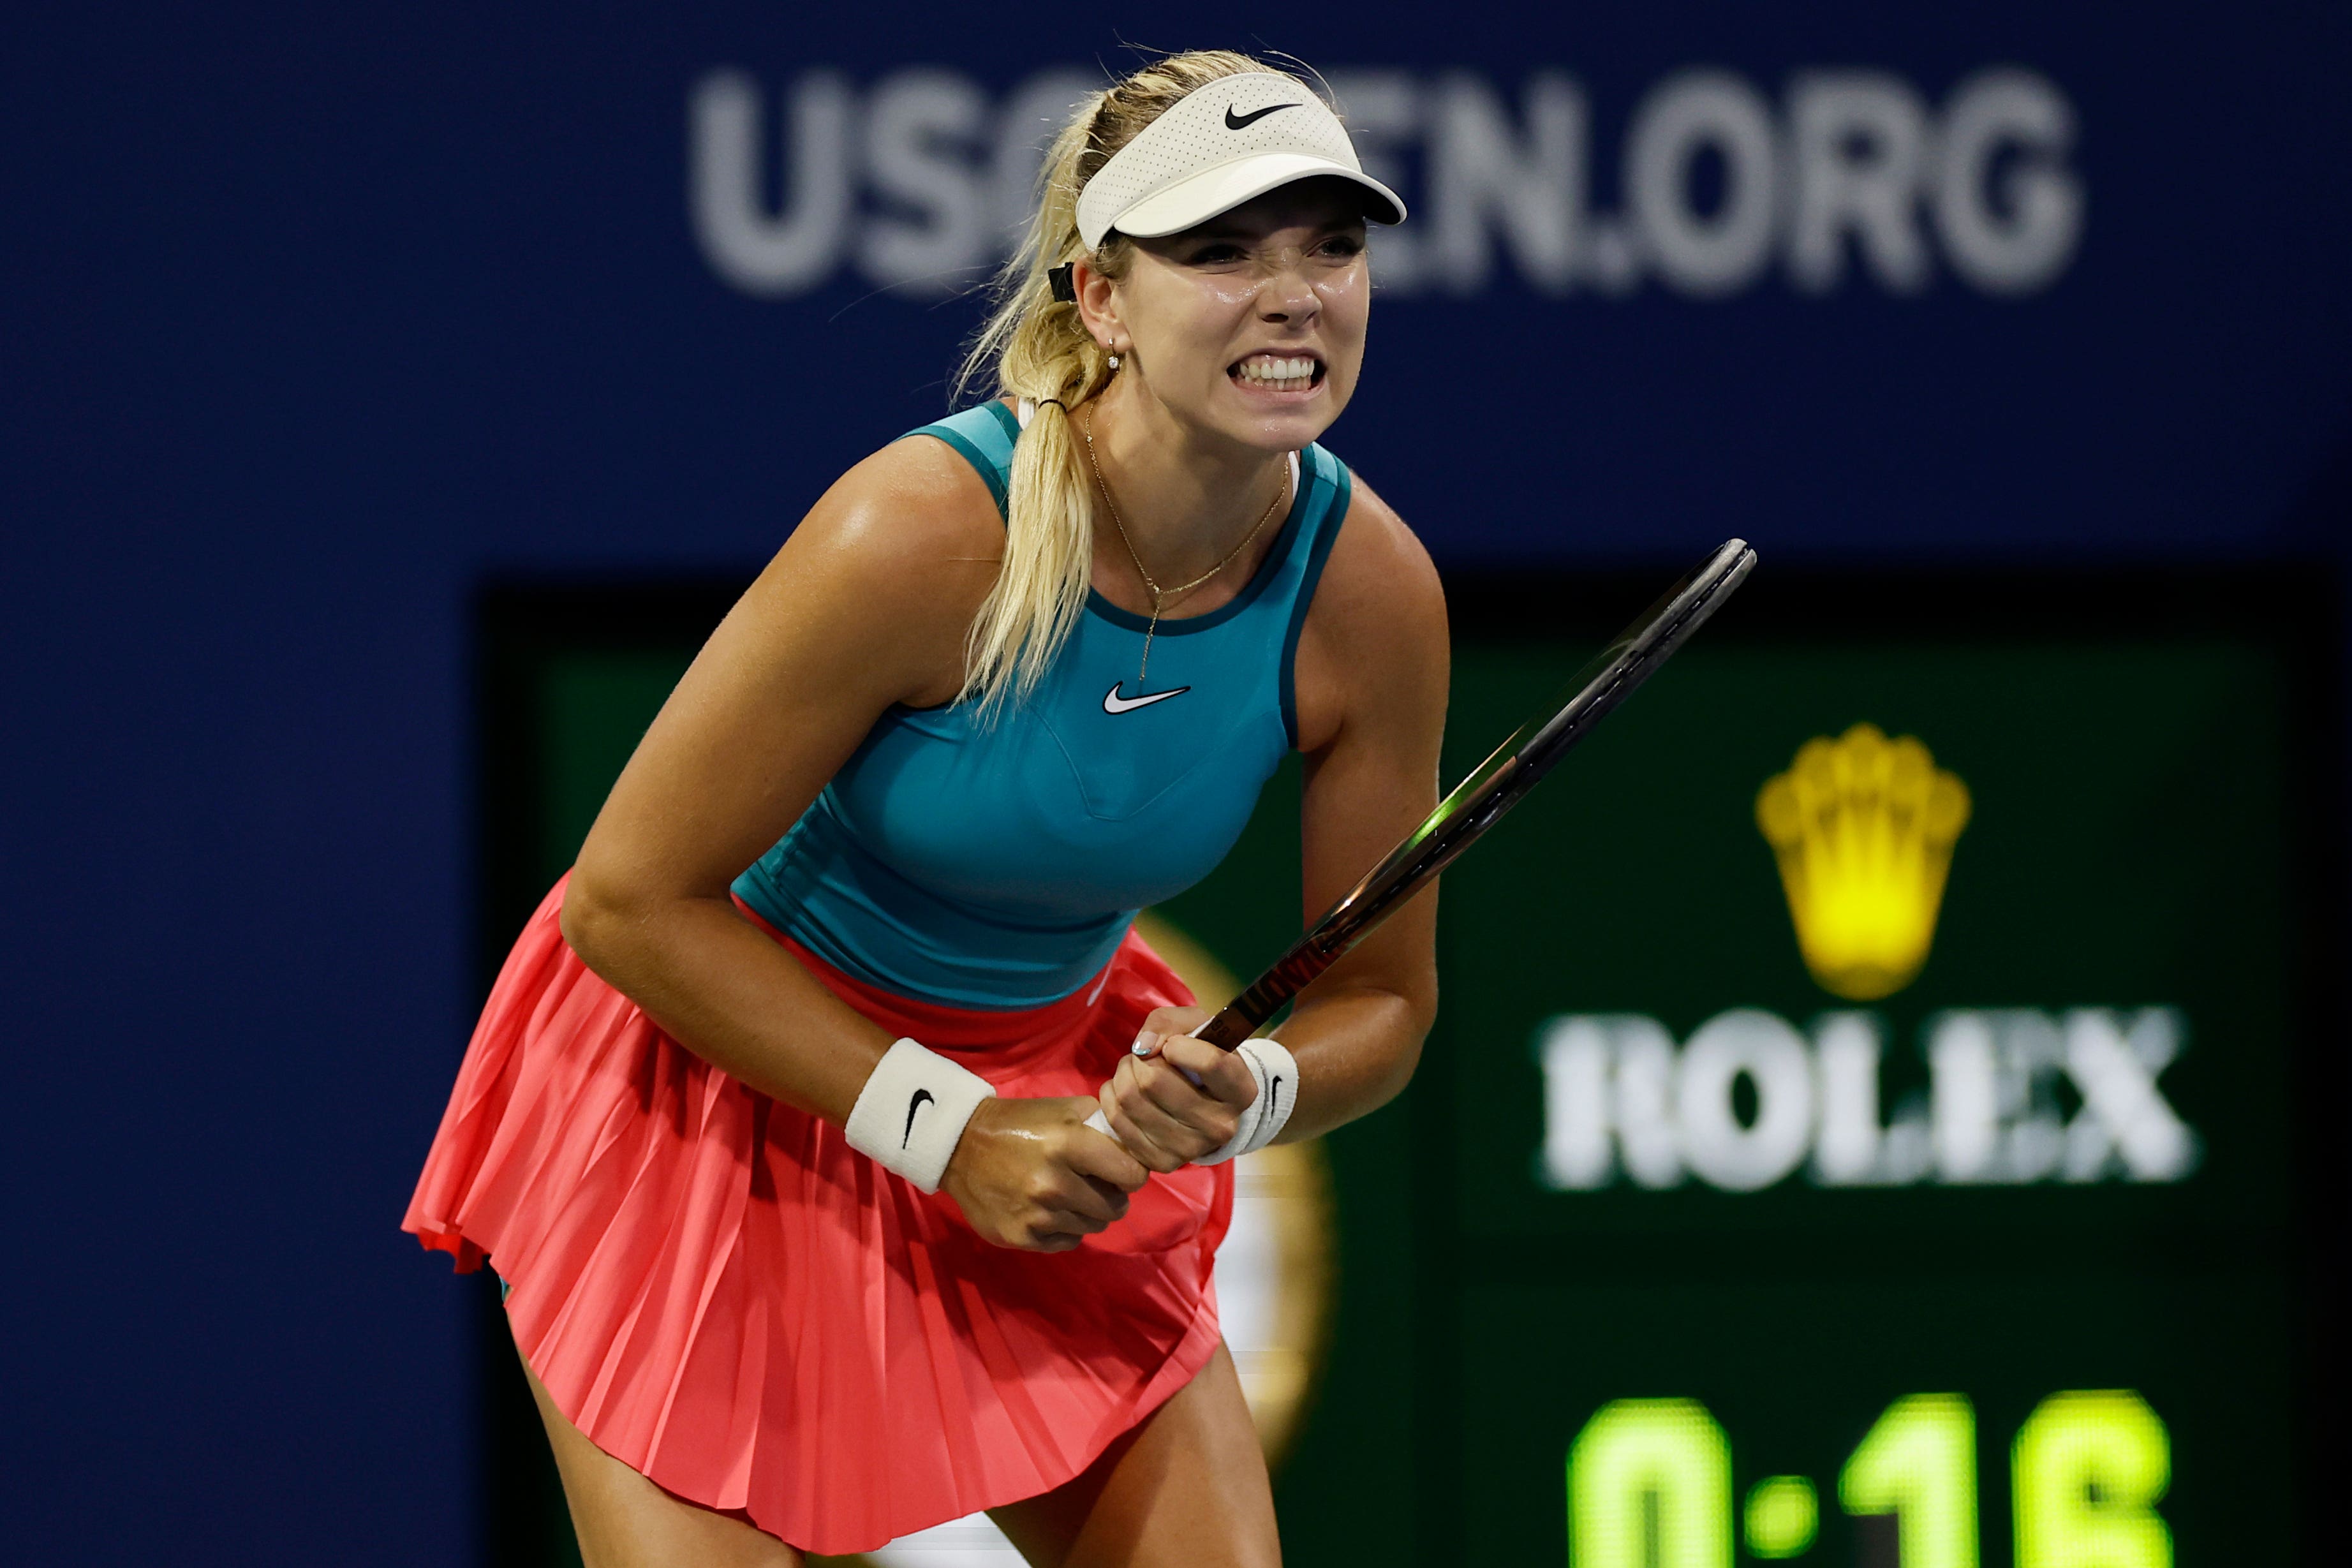 Katie Boulter’s run came to an end